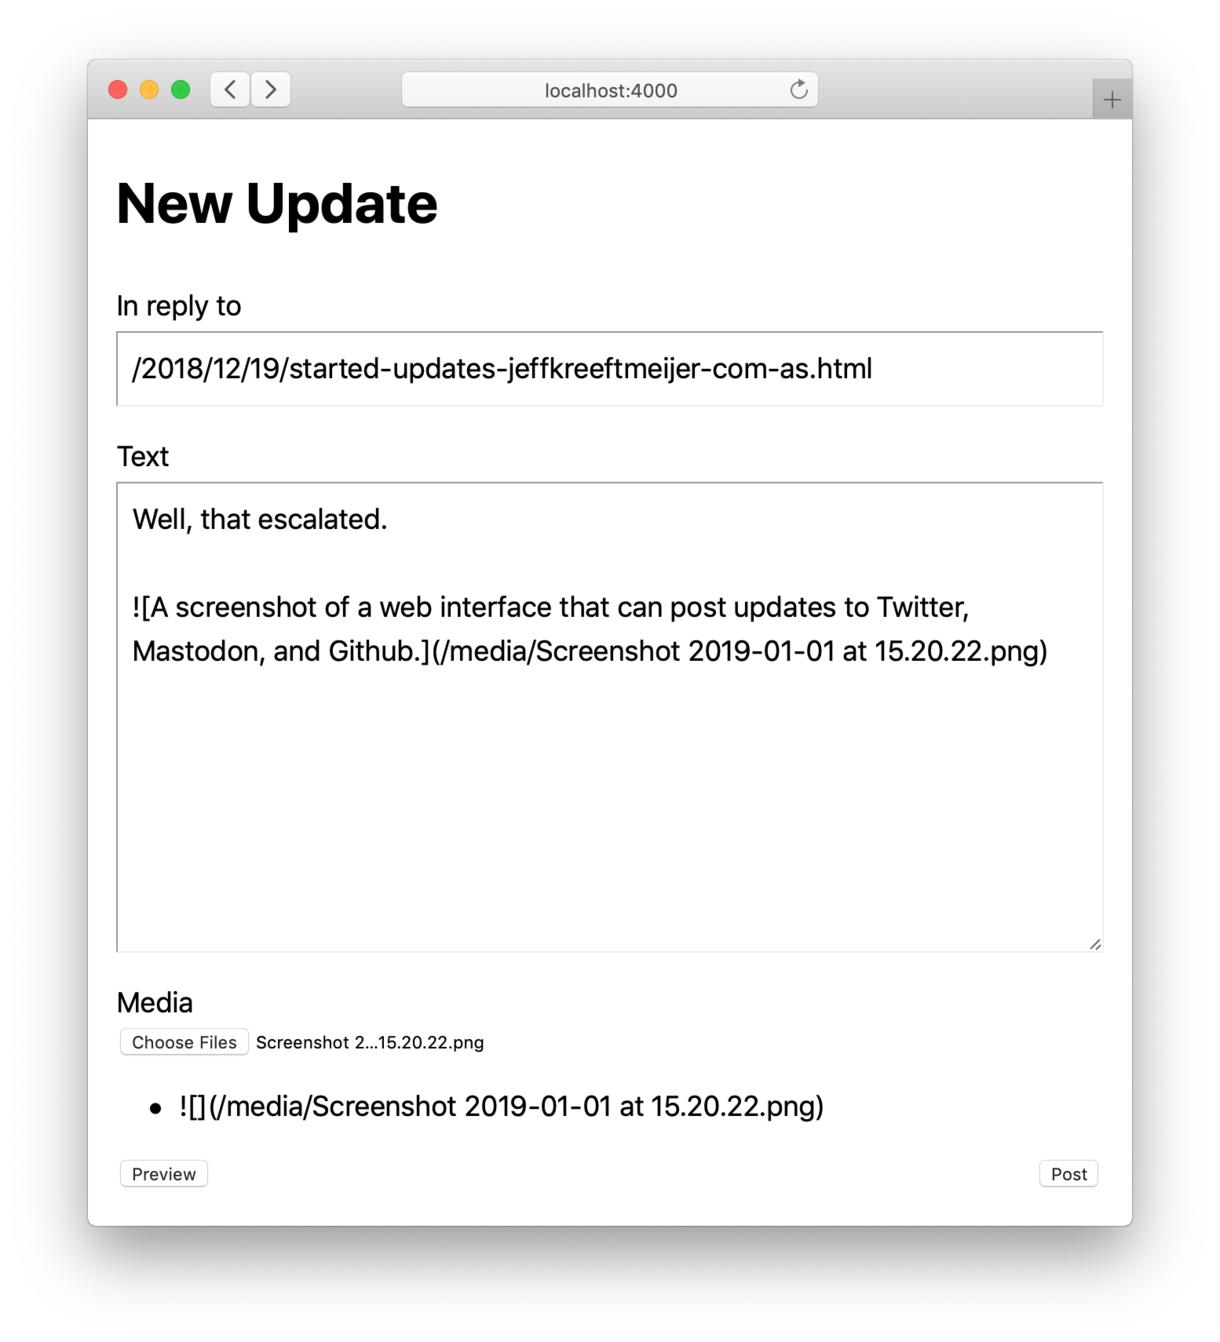 A screenshot of a web interface that can post updates to Twitter, Mastodon, and Github.